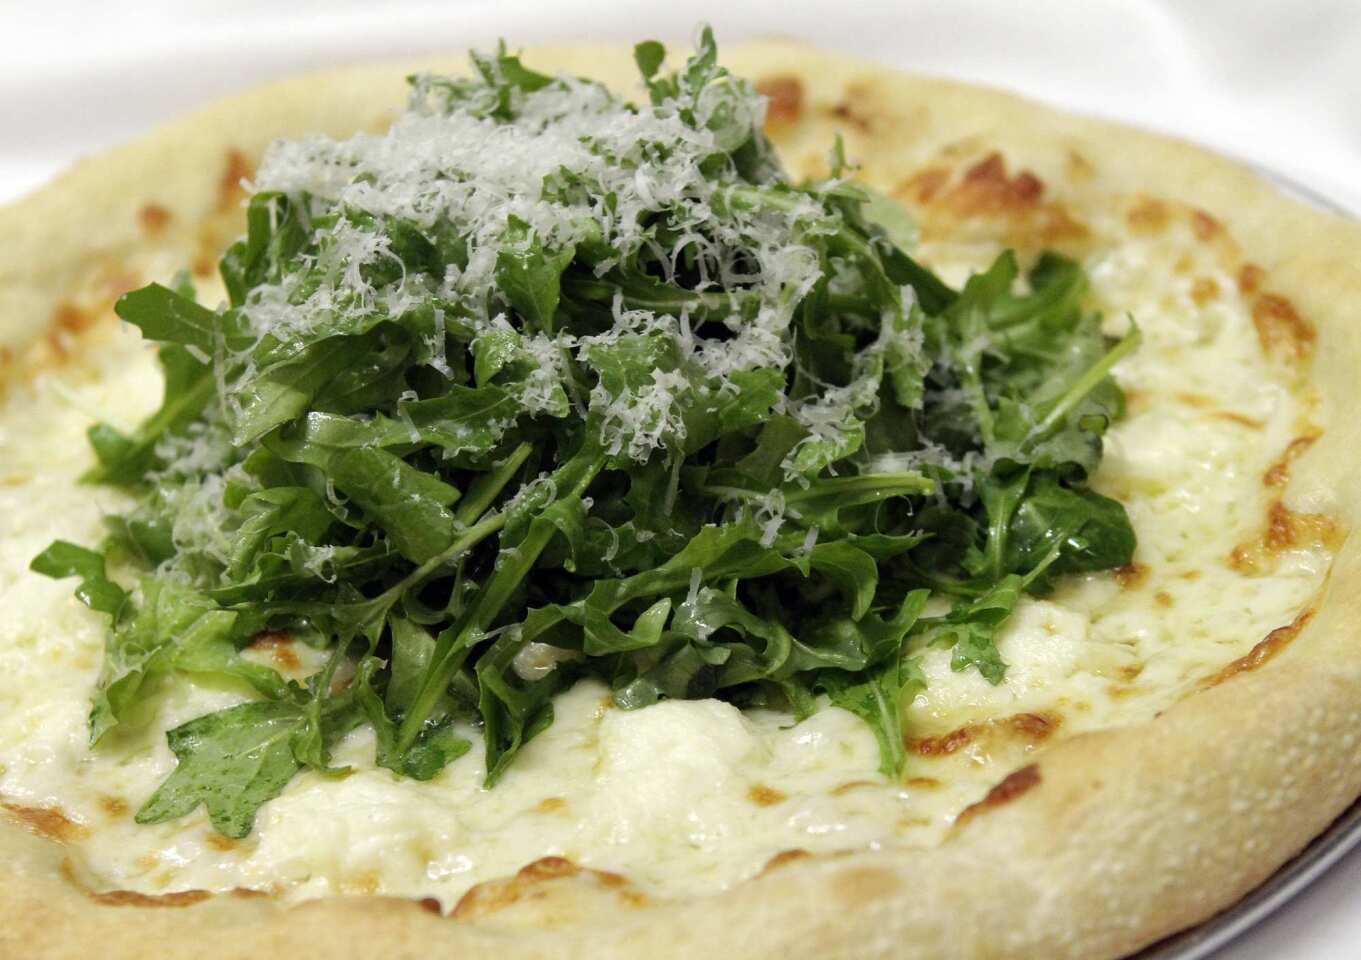 The bianca-verde pizza is topped with preserved lemon, garlic, ricotta, arugula and grated Reggiano cheese.